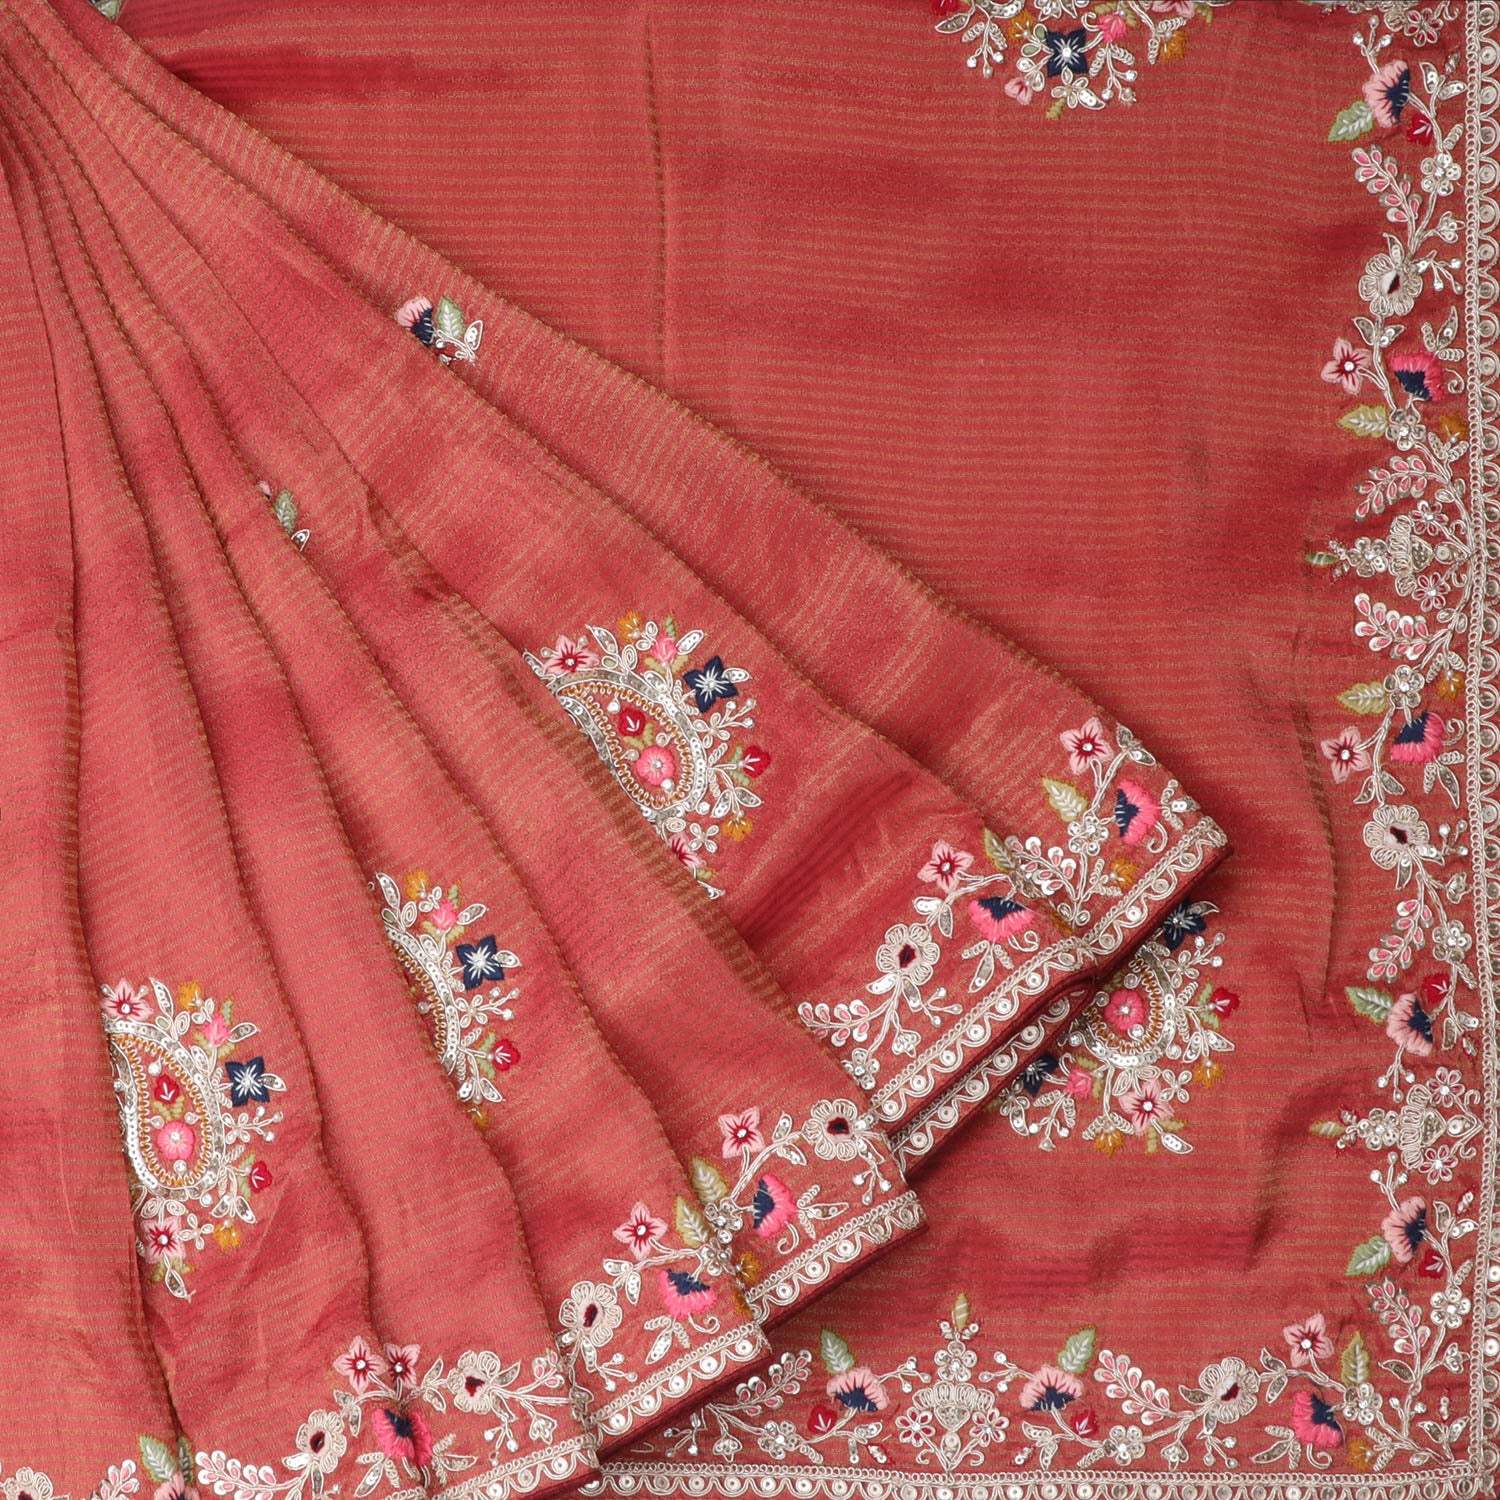 Rusty Orange Tissue Saree With Floral Embroidery - Singhania's